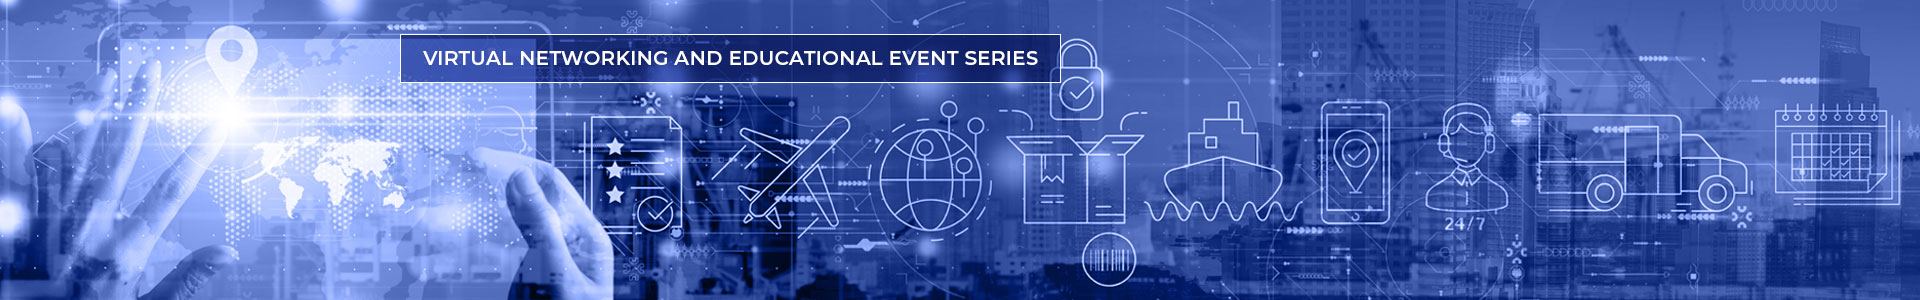 Virtual Networking and Educational Event Series